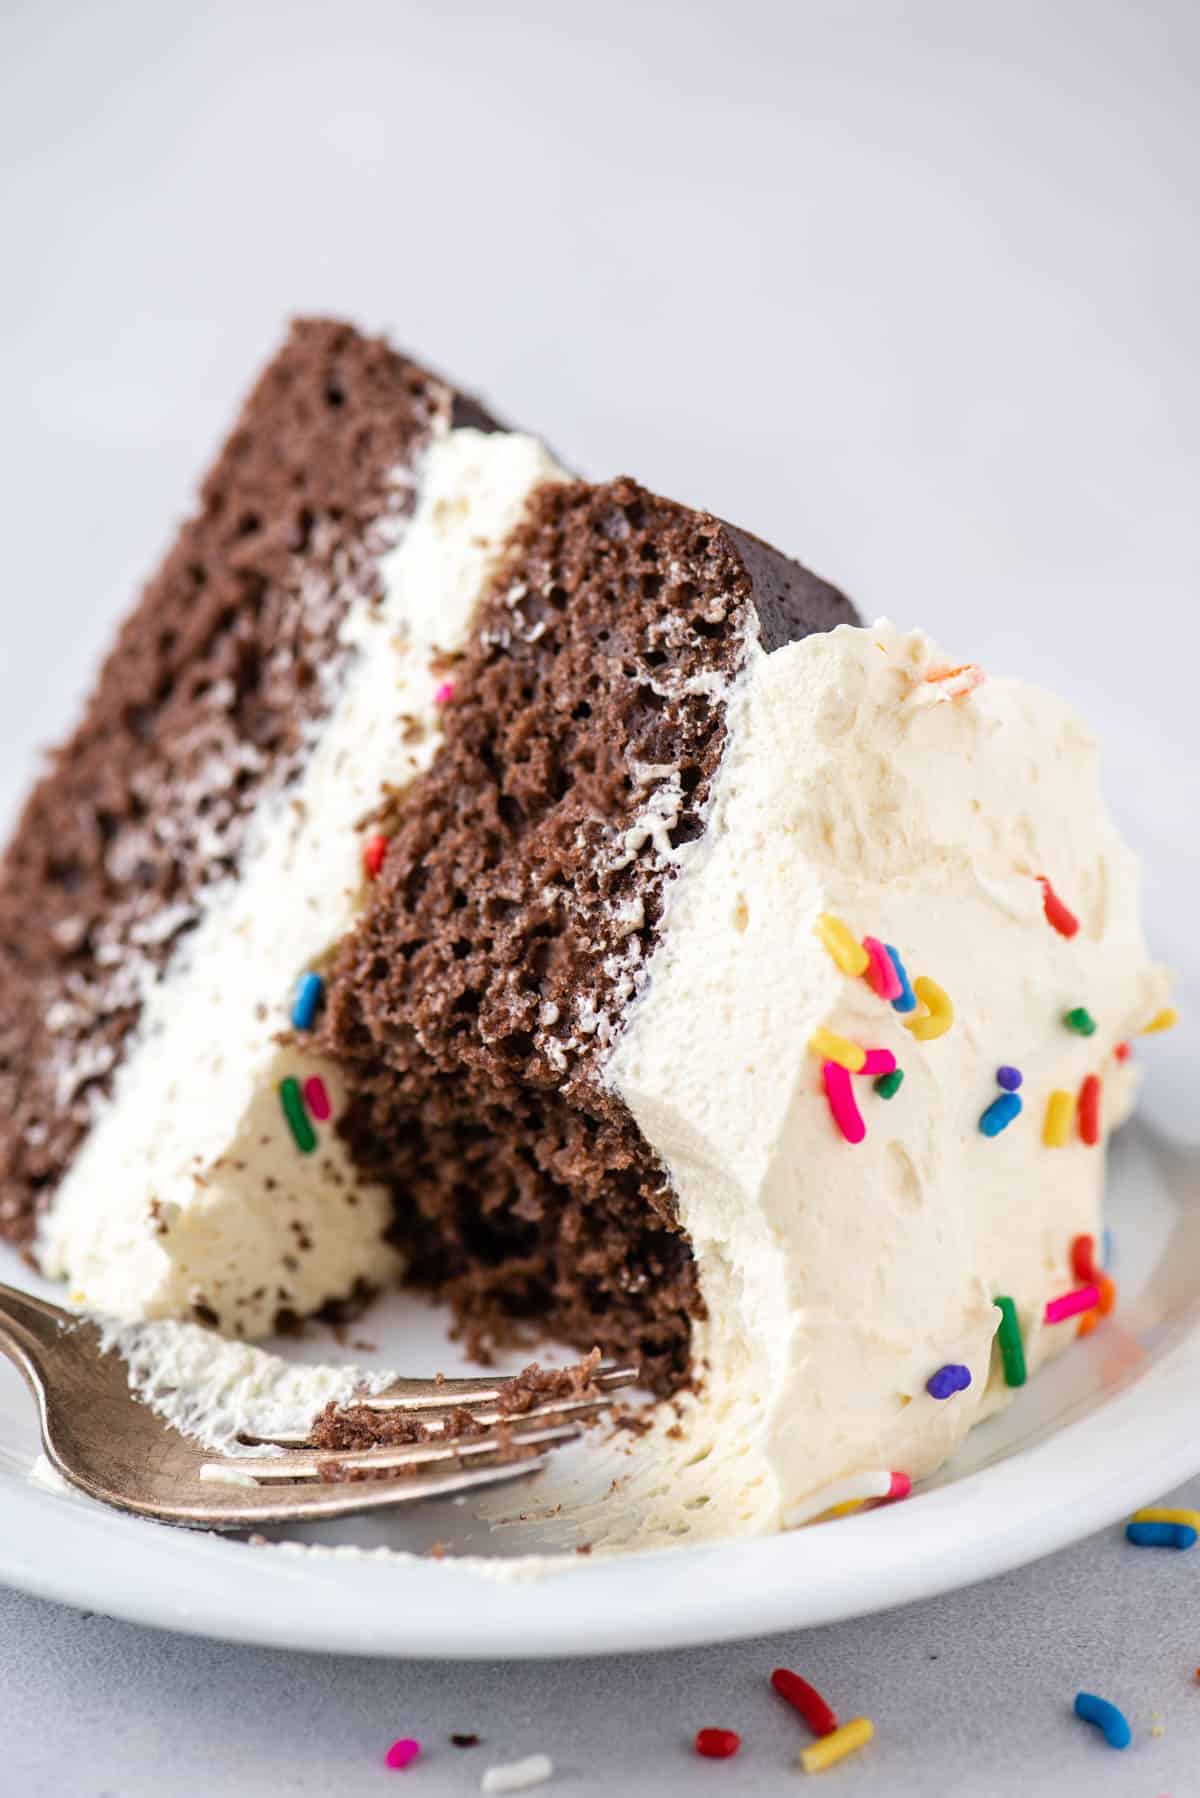 partially eaten chocolate cake topped with cool whip frosting and sprinkles on a while plate with a fork